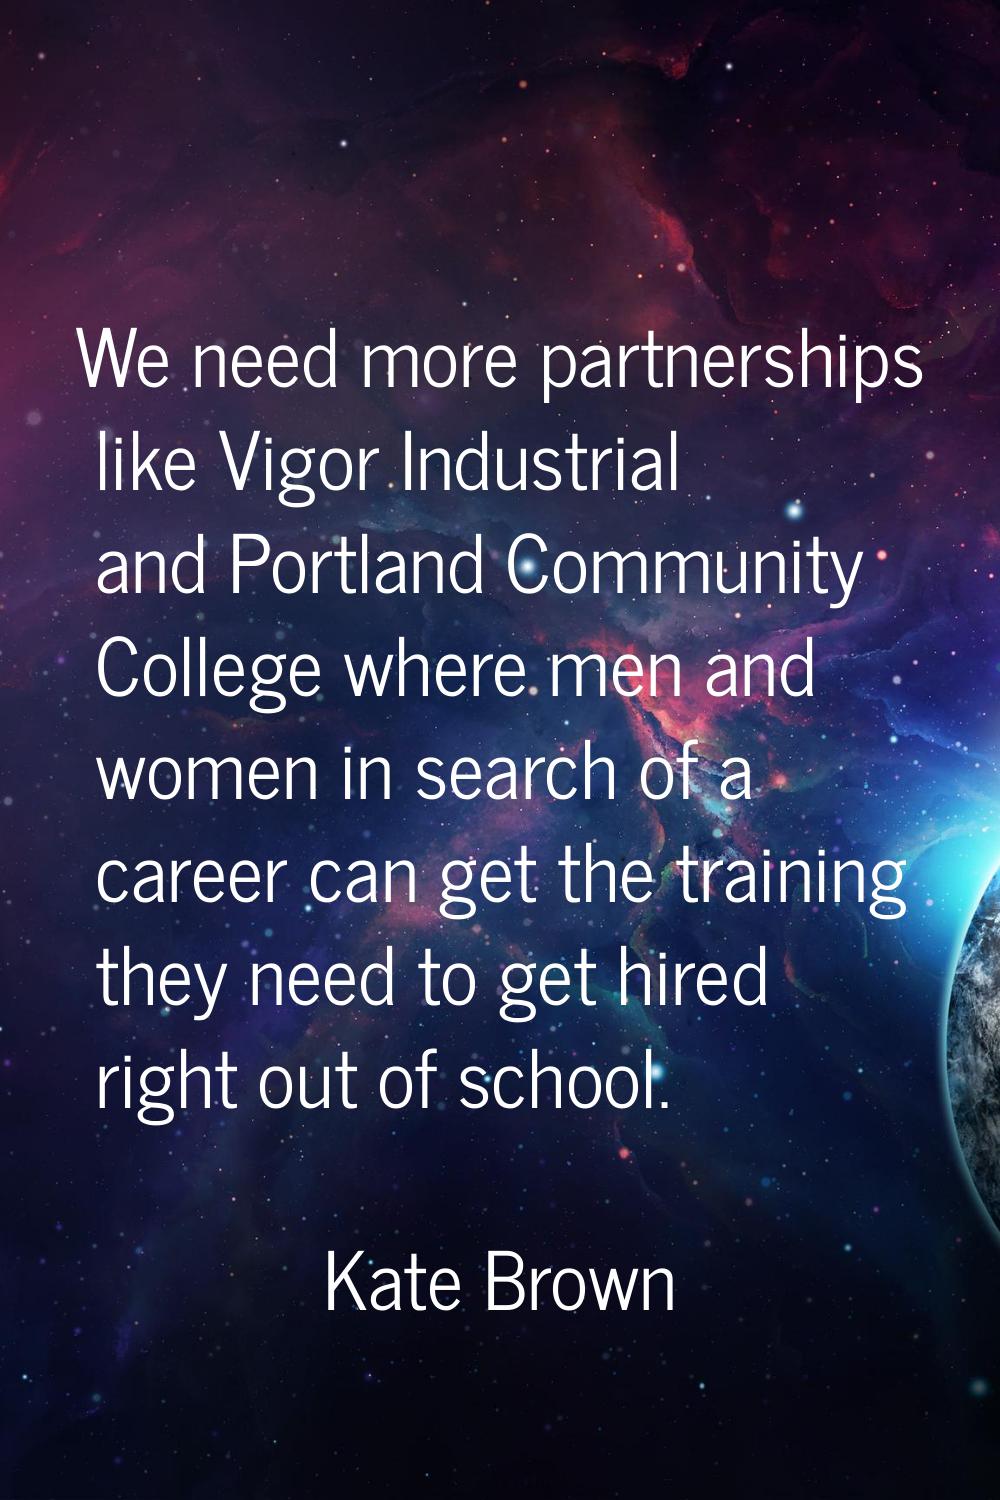 We need more partnerships like Vigor Industrial and Portland Community College where men and women 